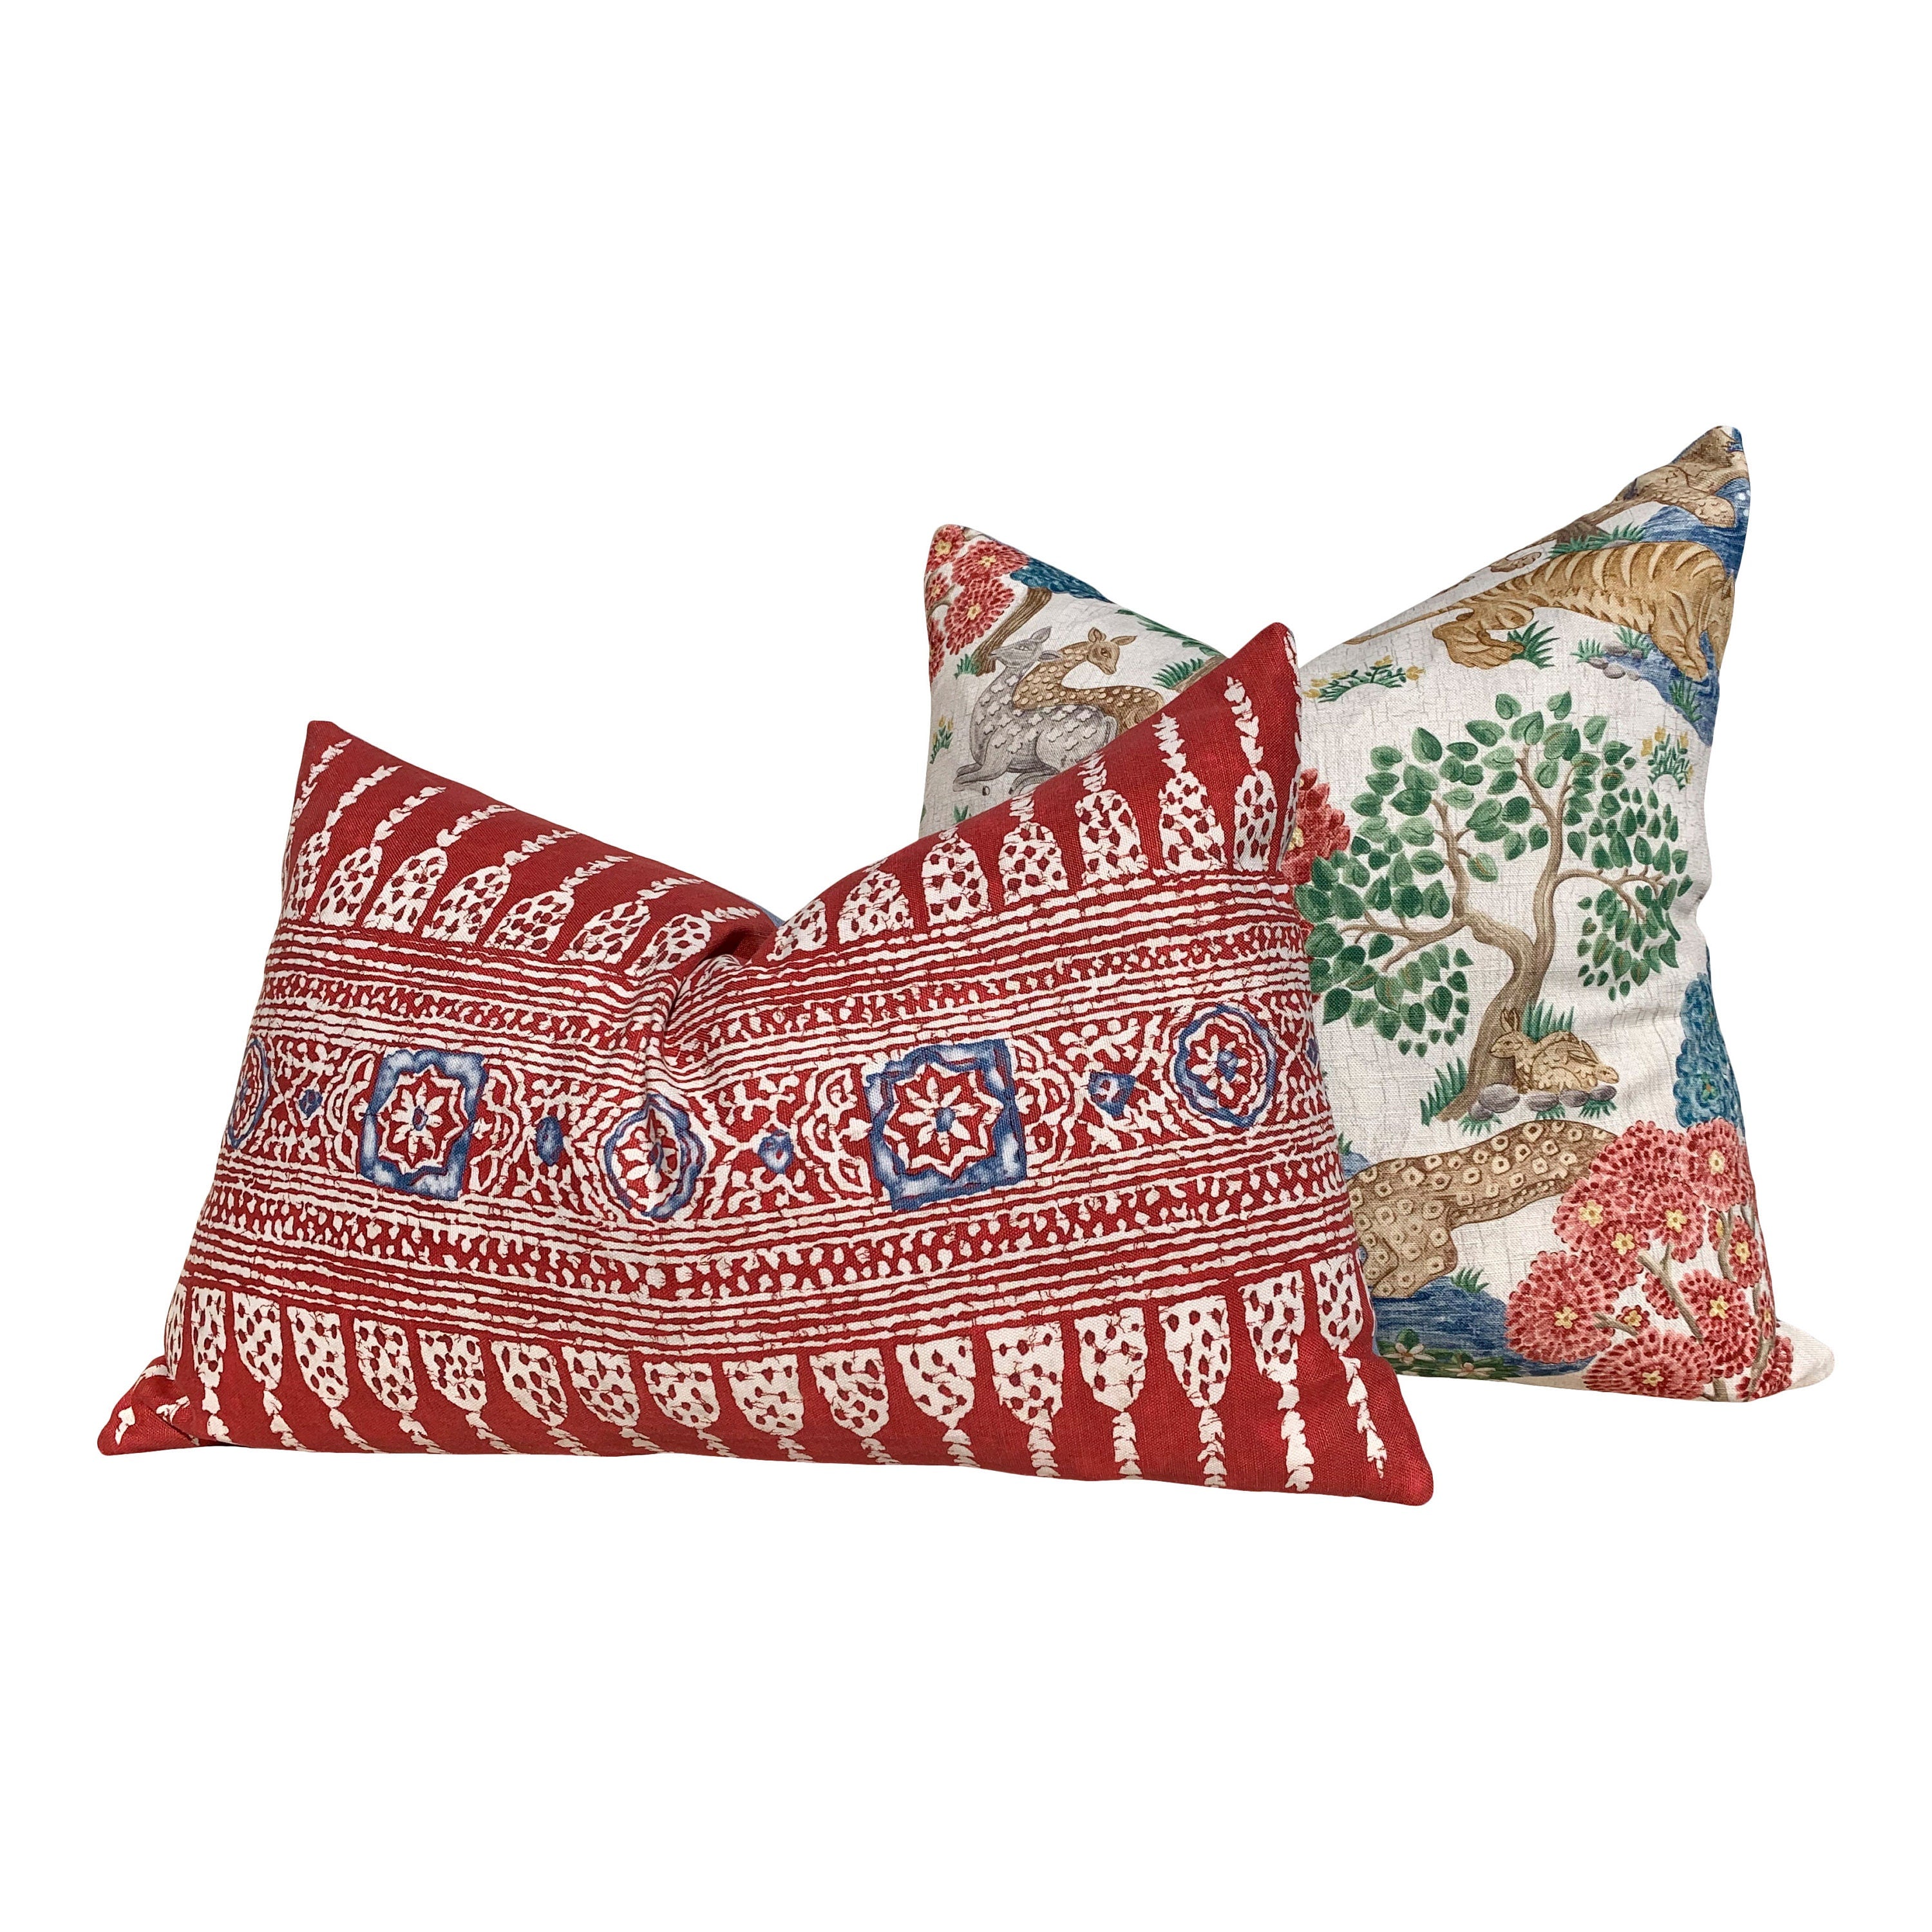 Thibaut Javanese Stripe Pillow in Red. Lumbar Striped Pillow, Boho Red Pillow, Euro Sham 26X26, Blue and Red Cushion Cover, 